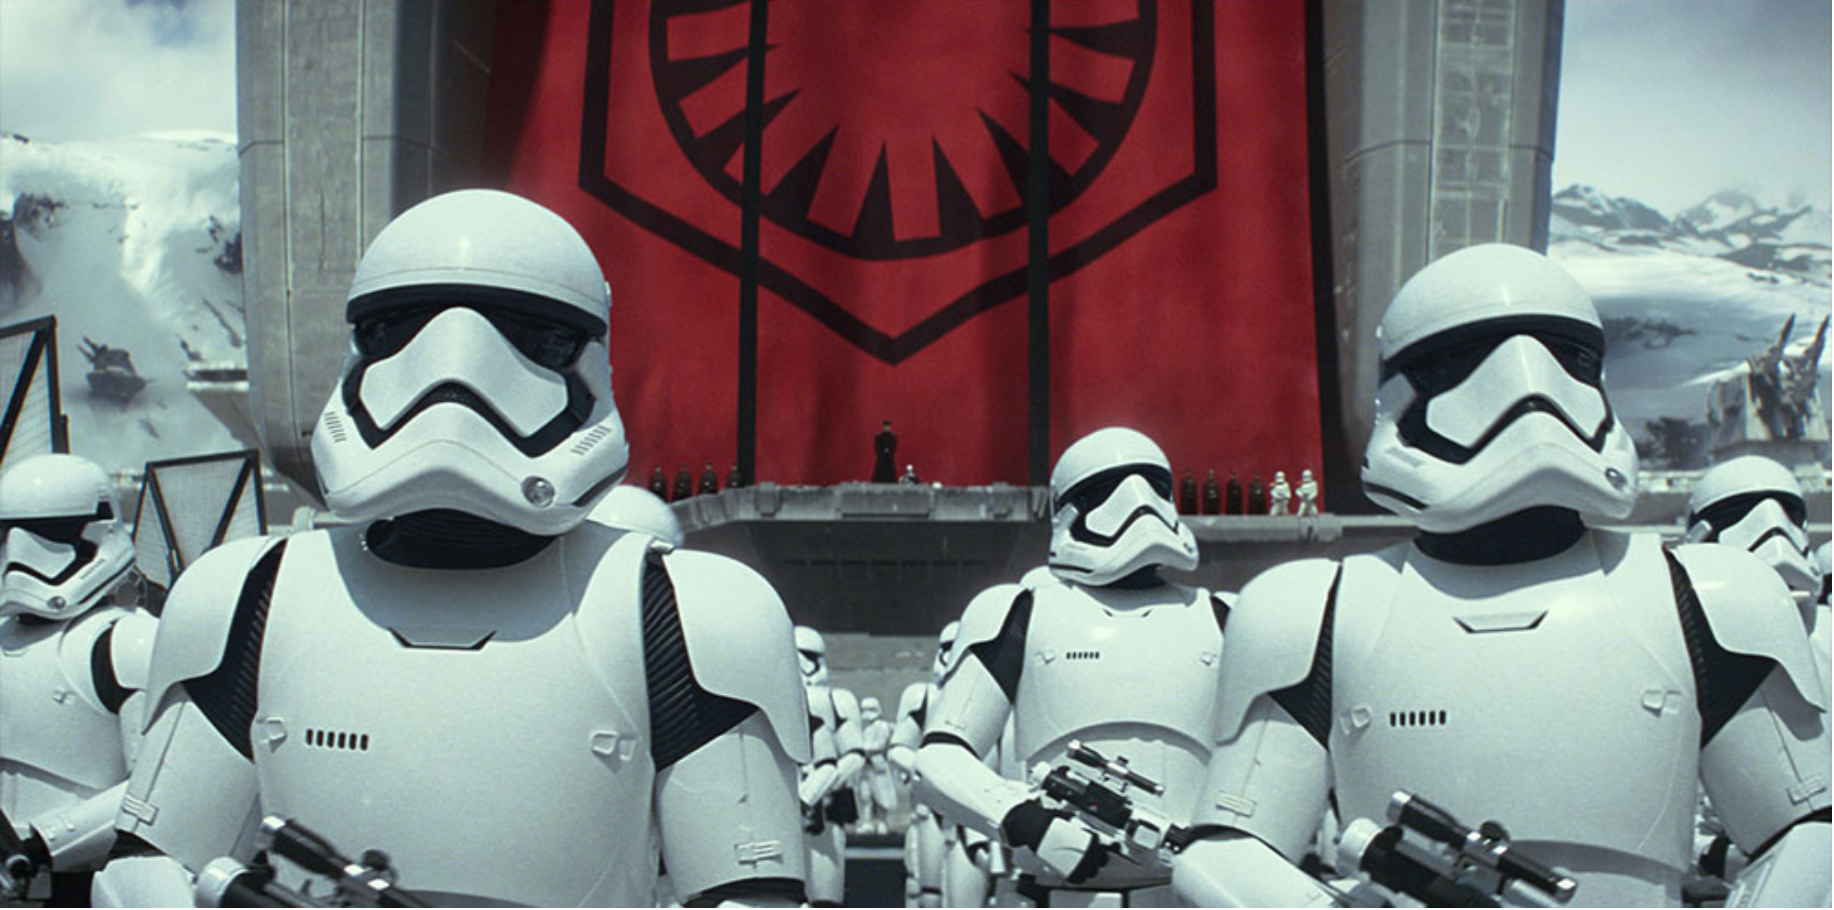 Stormtroopers standing in front of a First Order banner